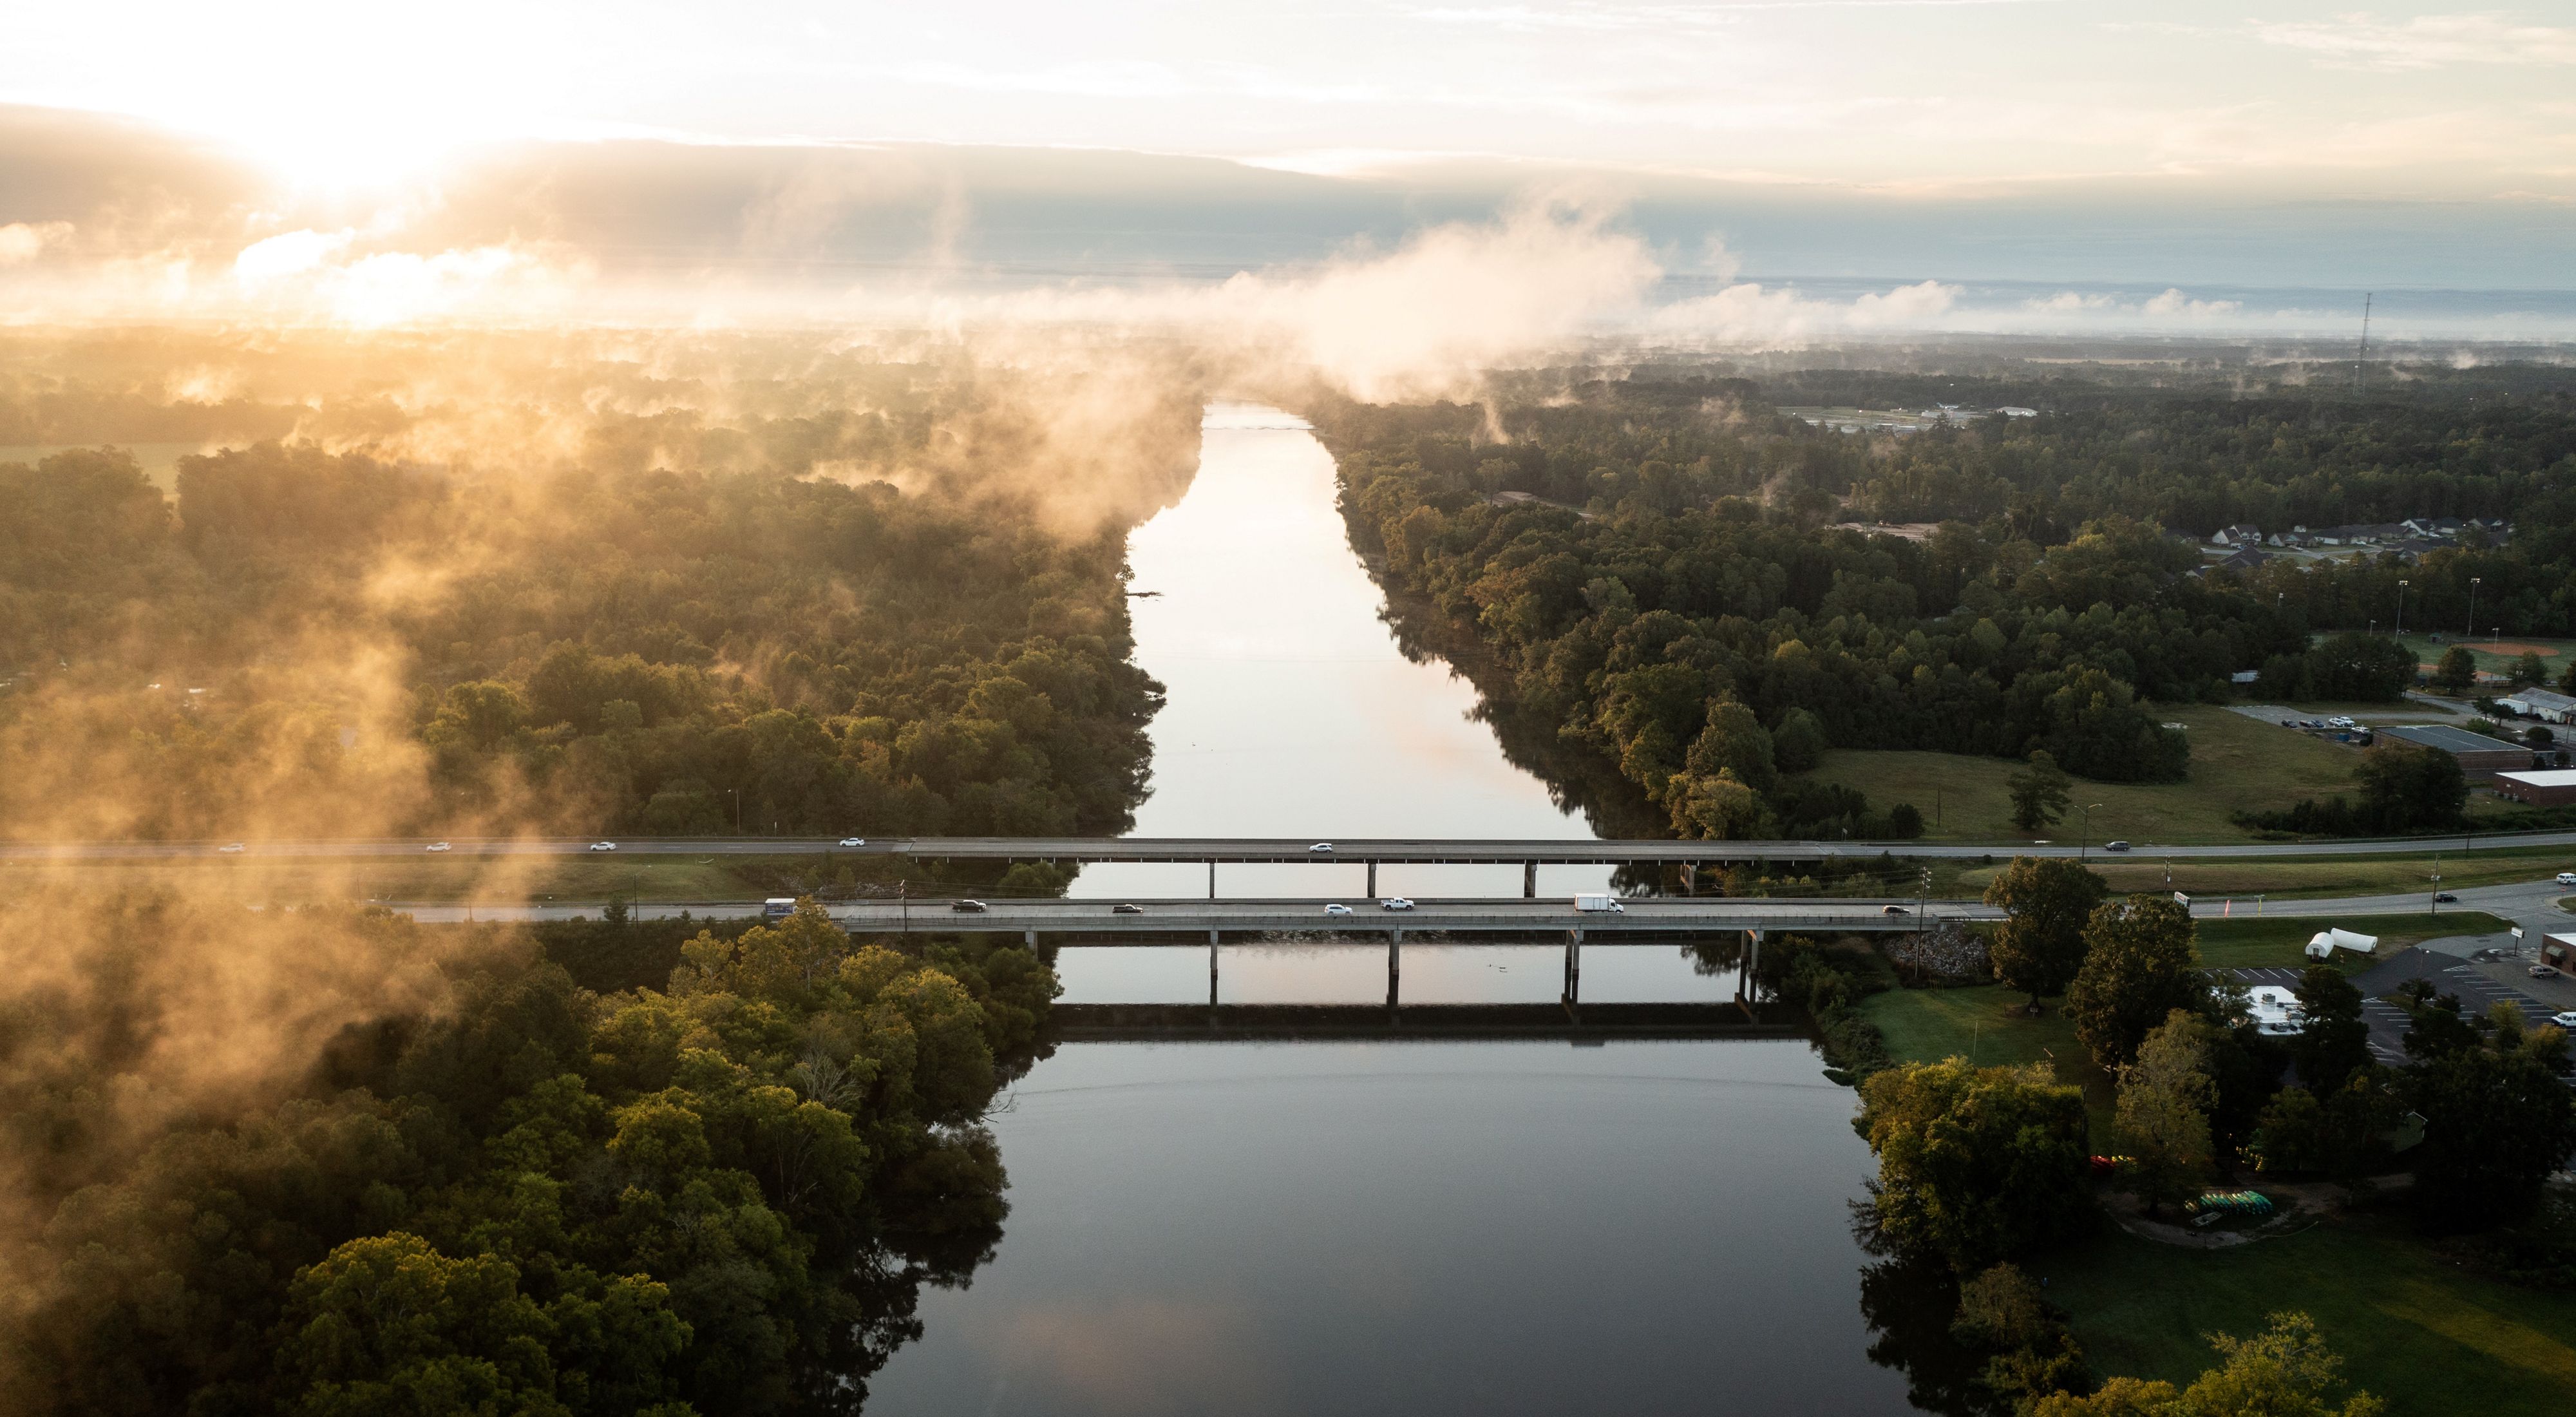 Sunrise over the Cape Fear River. Bridges carry cars across the river as white mist rises from the trees.